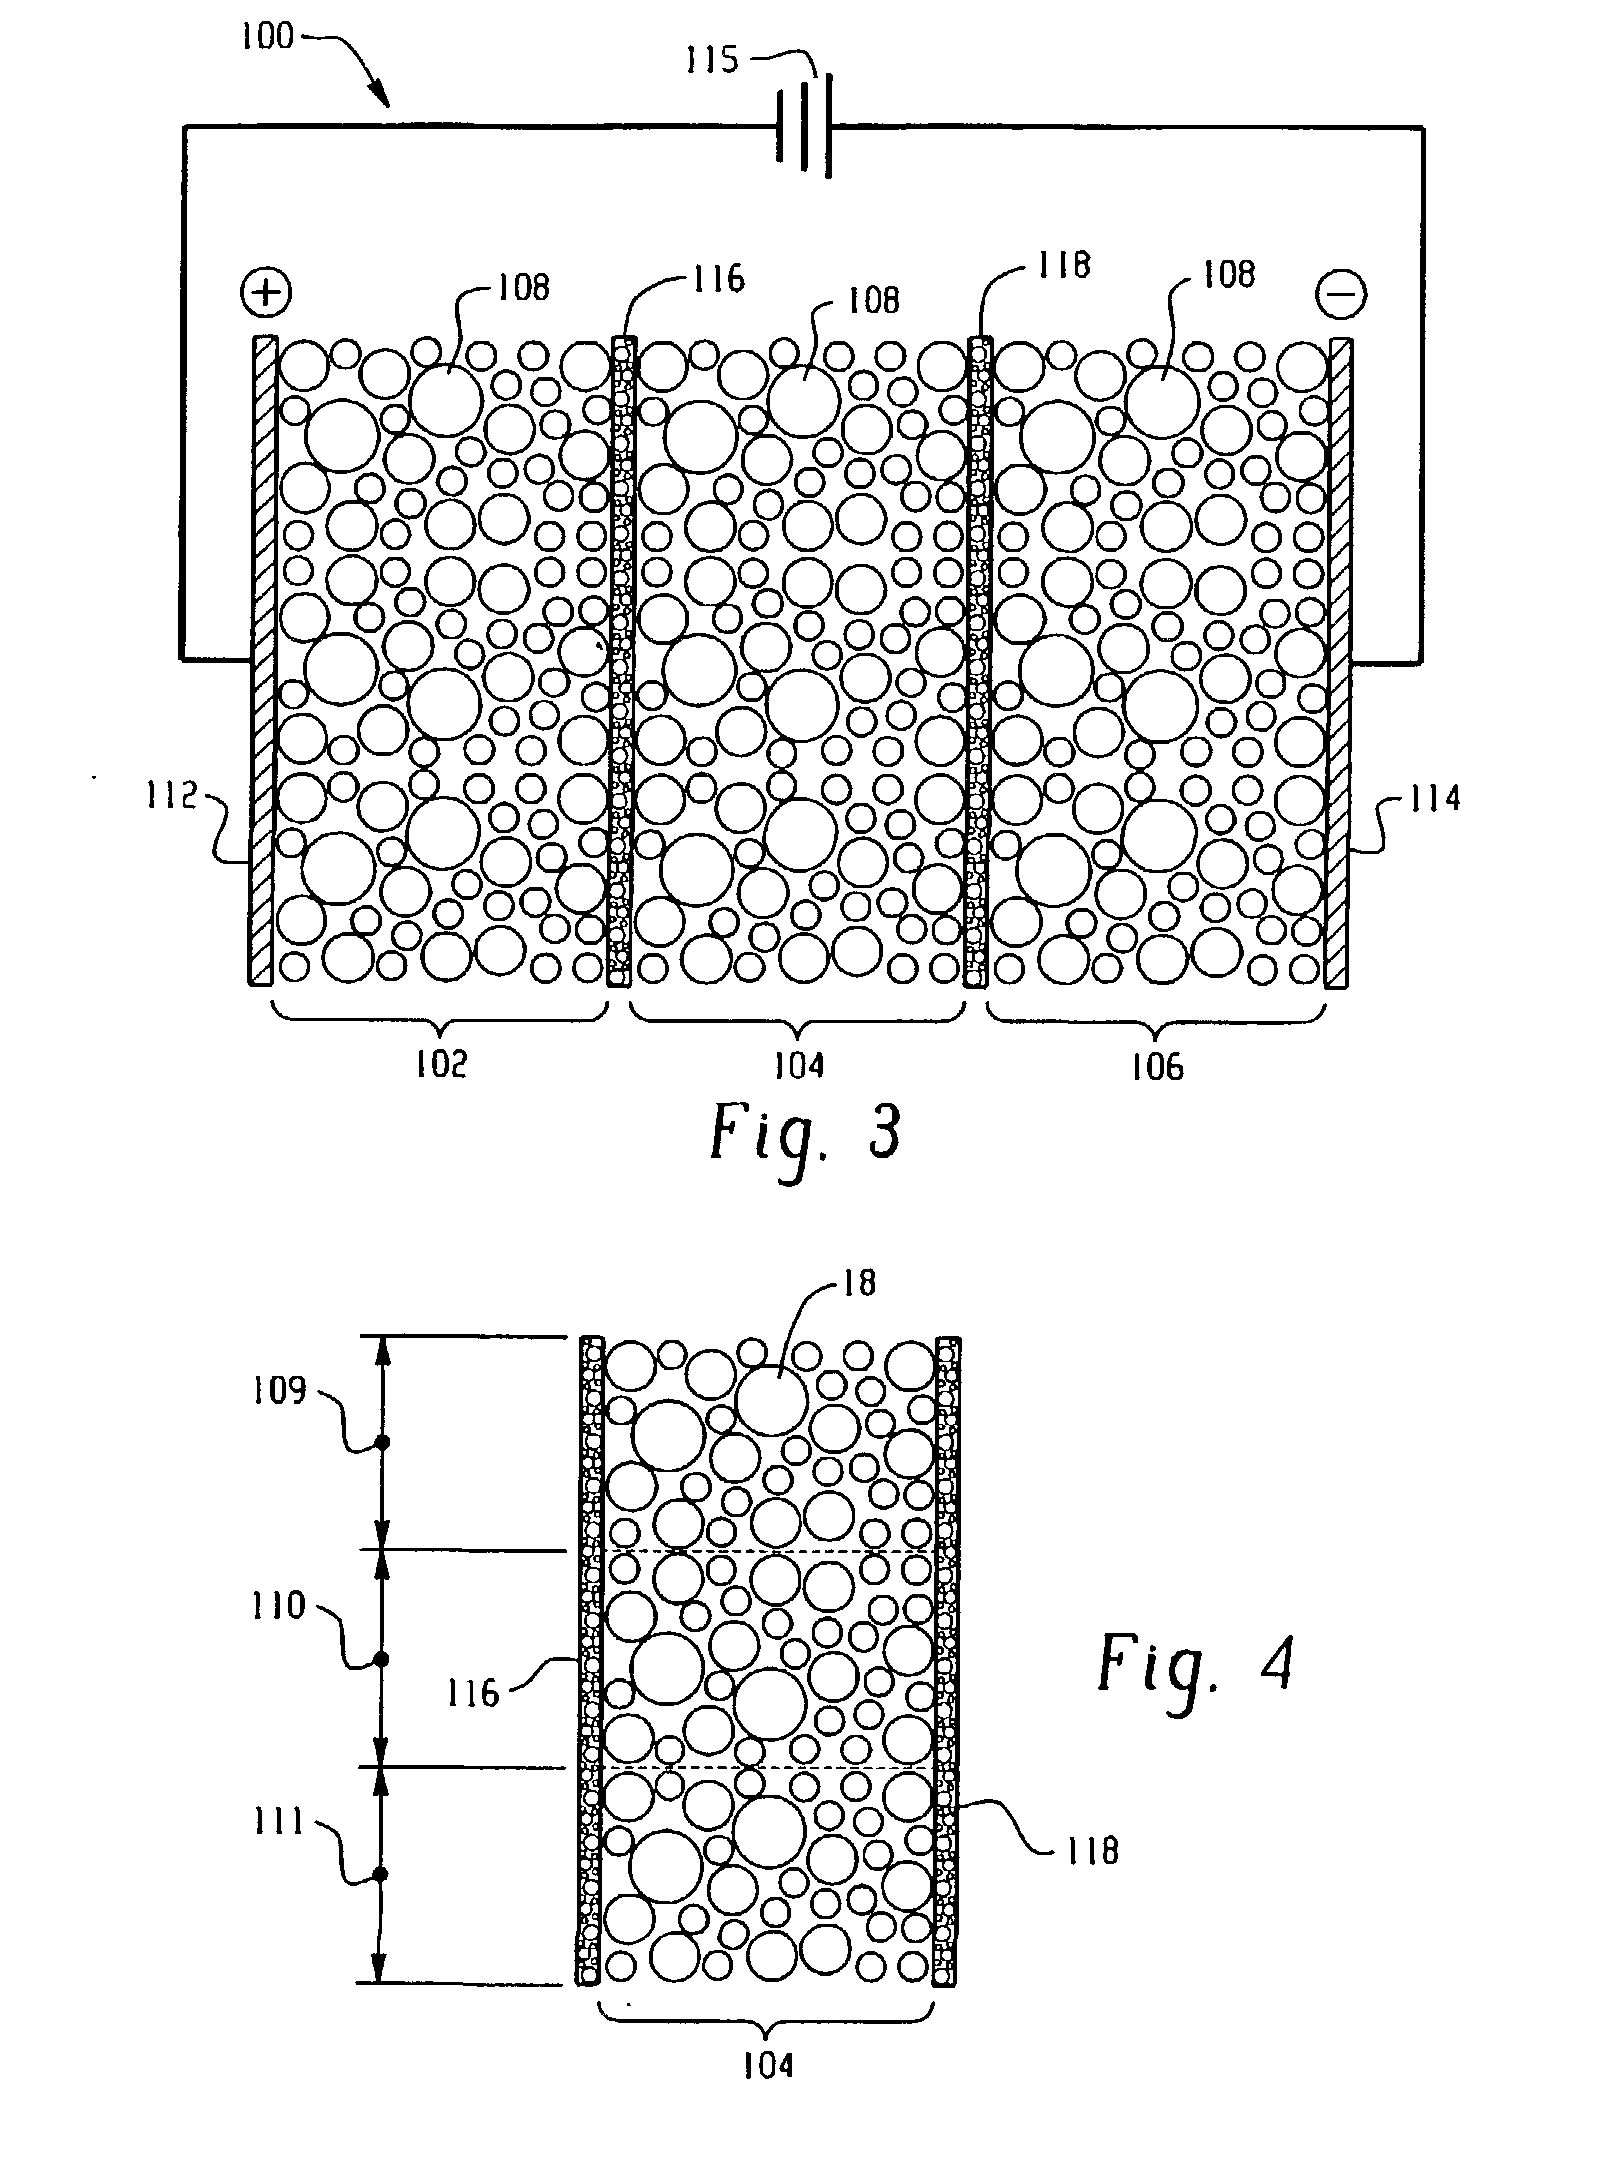 Electrolytic process and apparatus